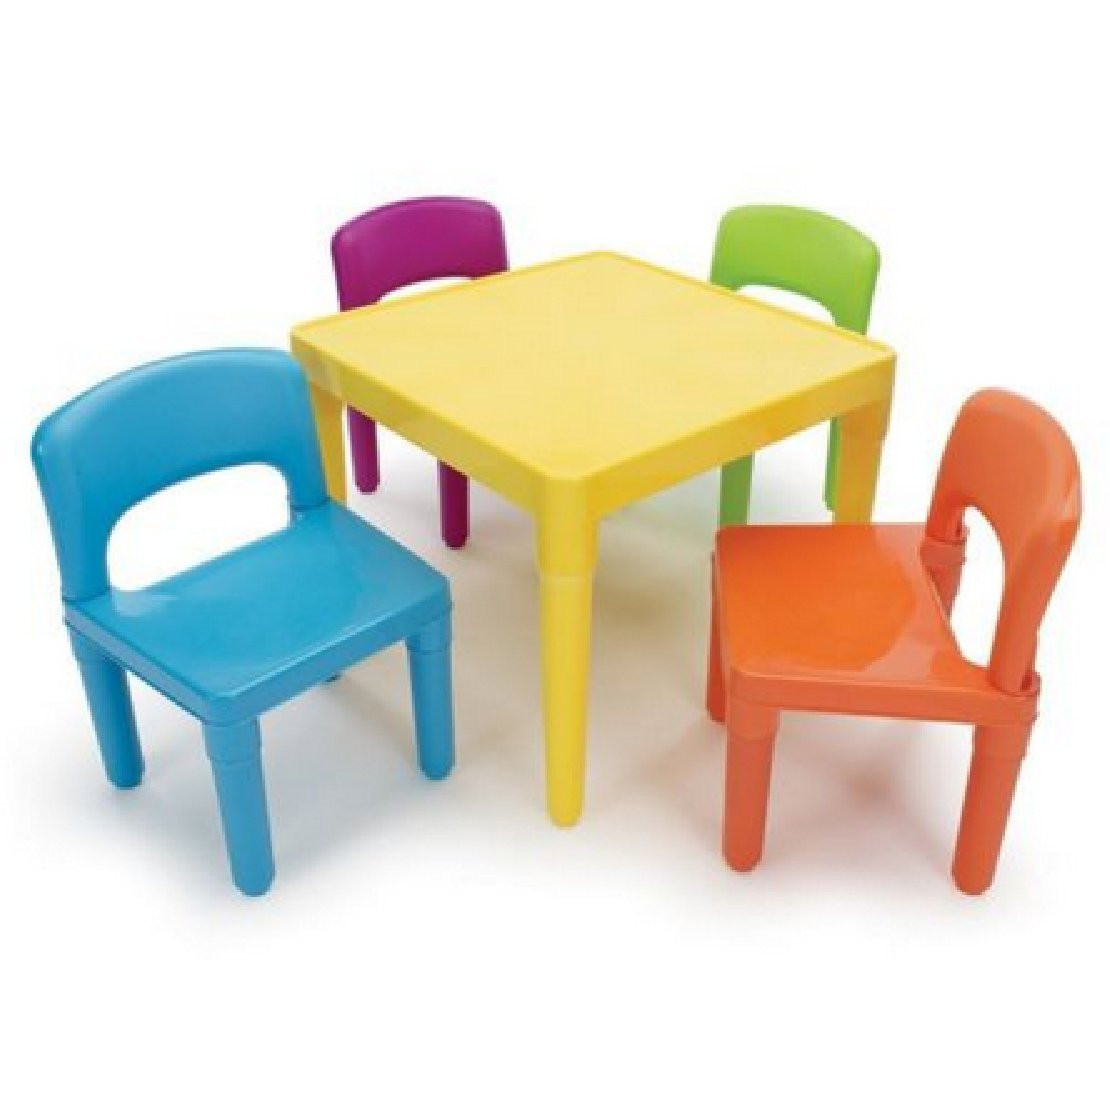 Amazon Kids Table And Chairs
 How to choose chairs for kids goodworksfurniture